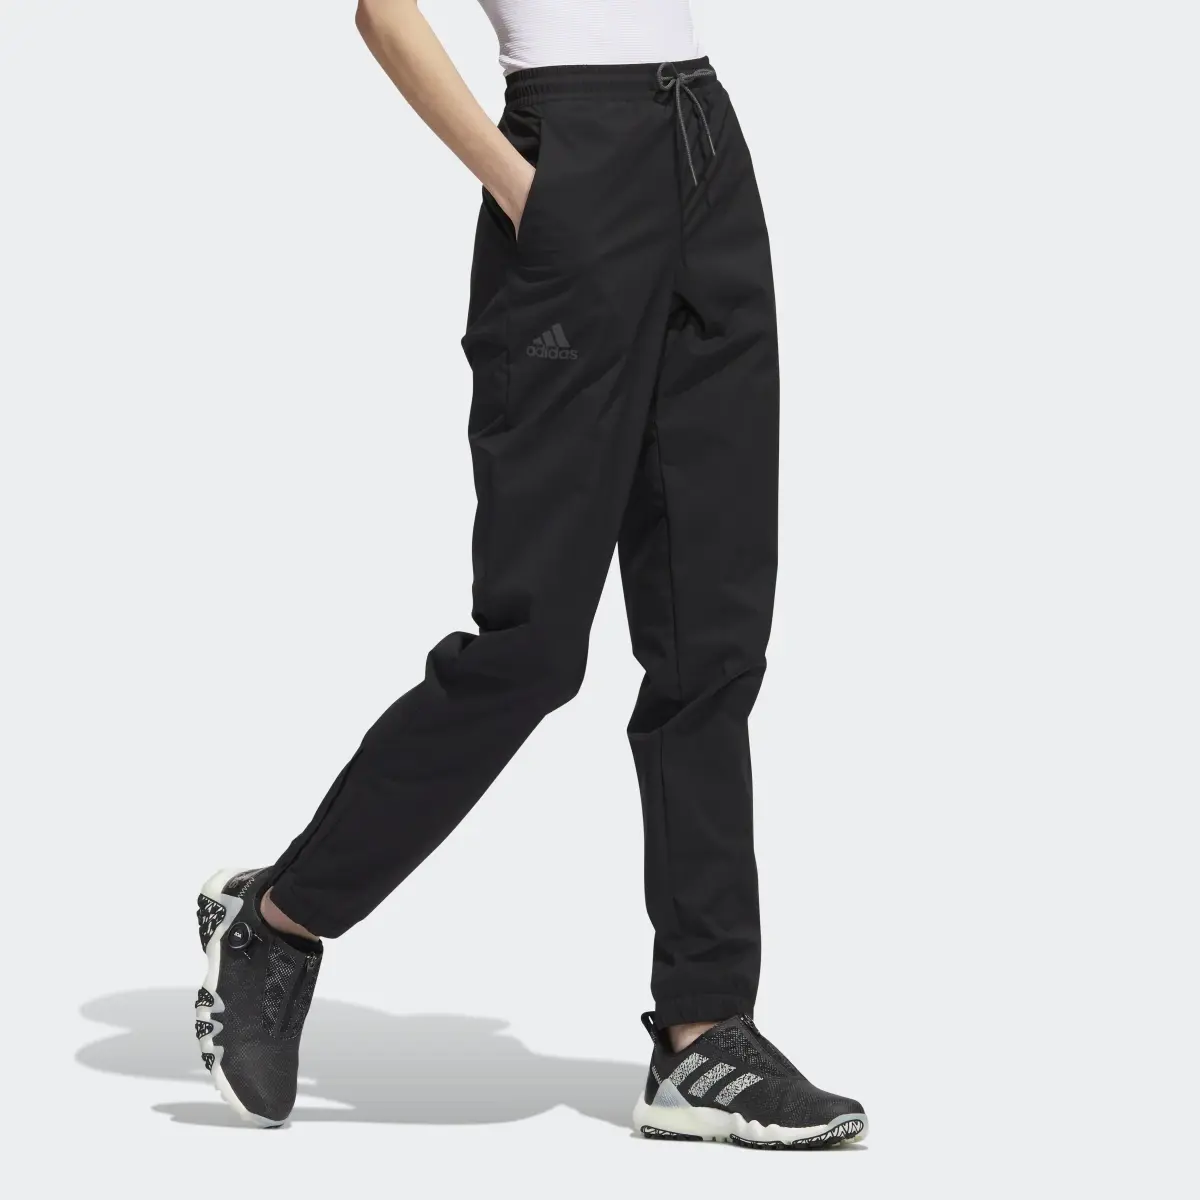 Adidas Winter Weight Pull-On Golf Pants. 3